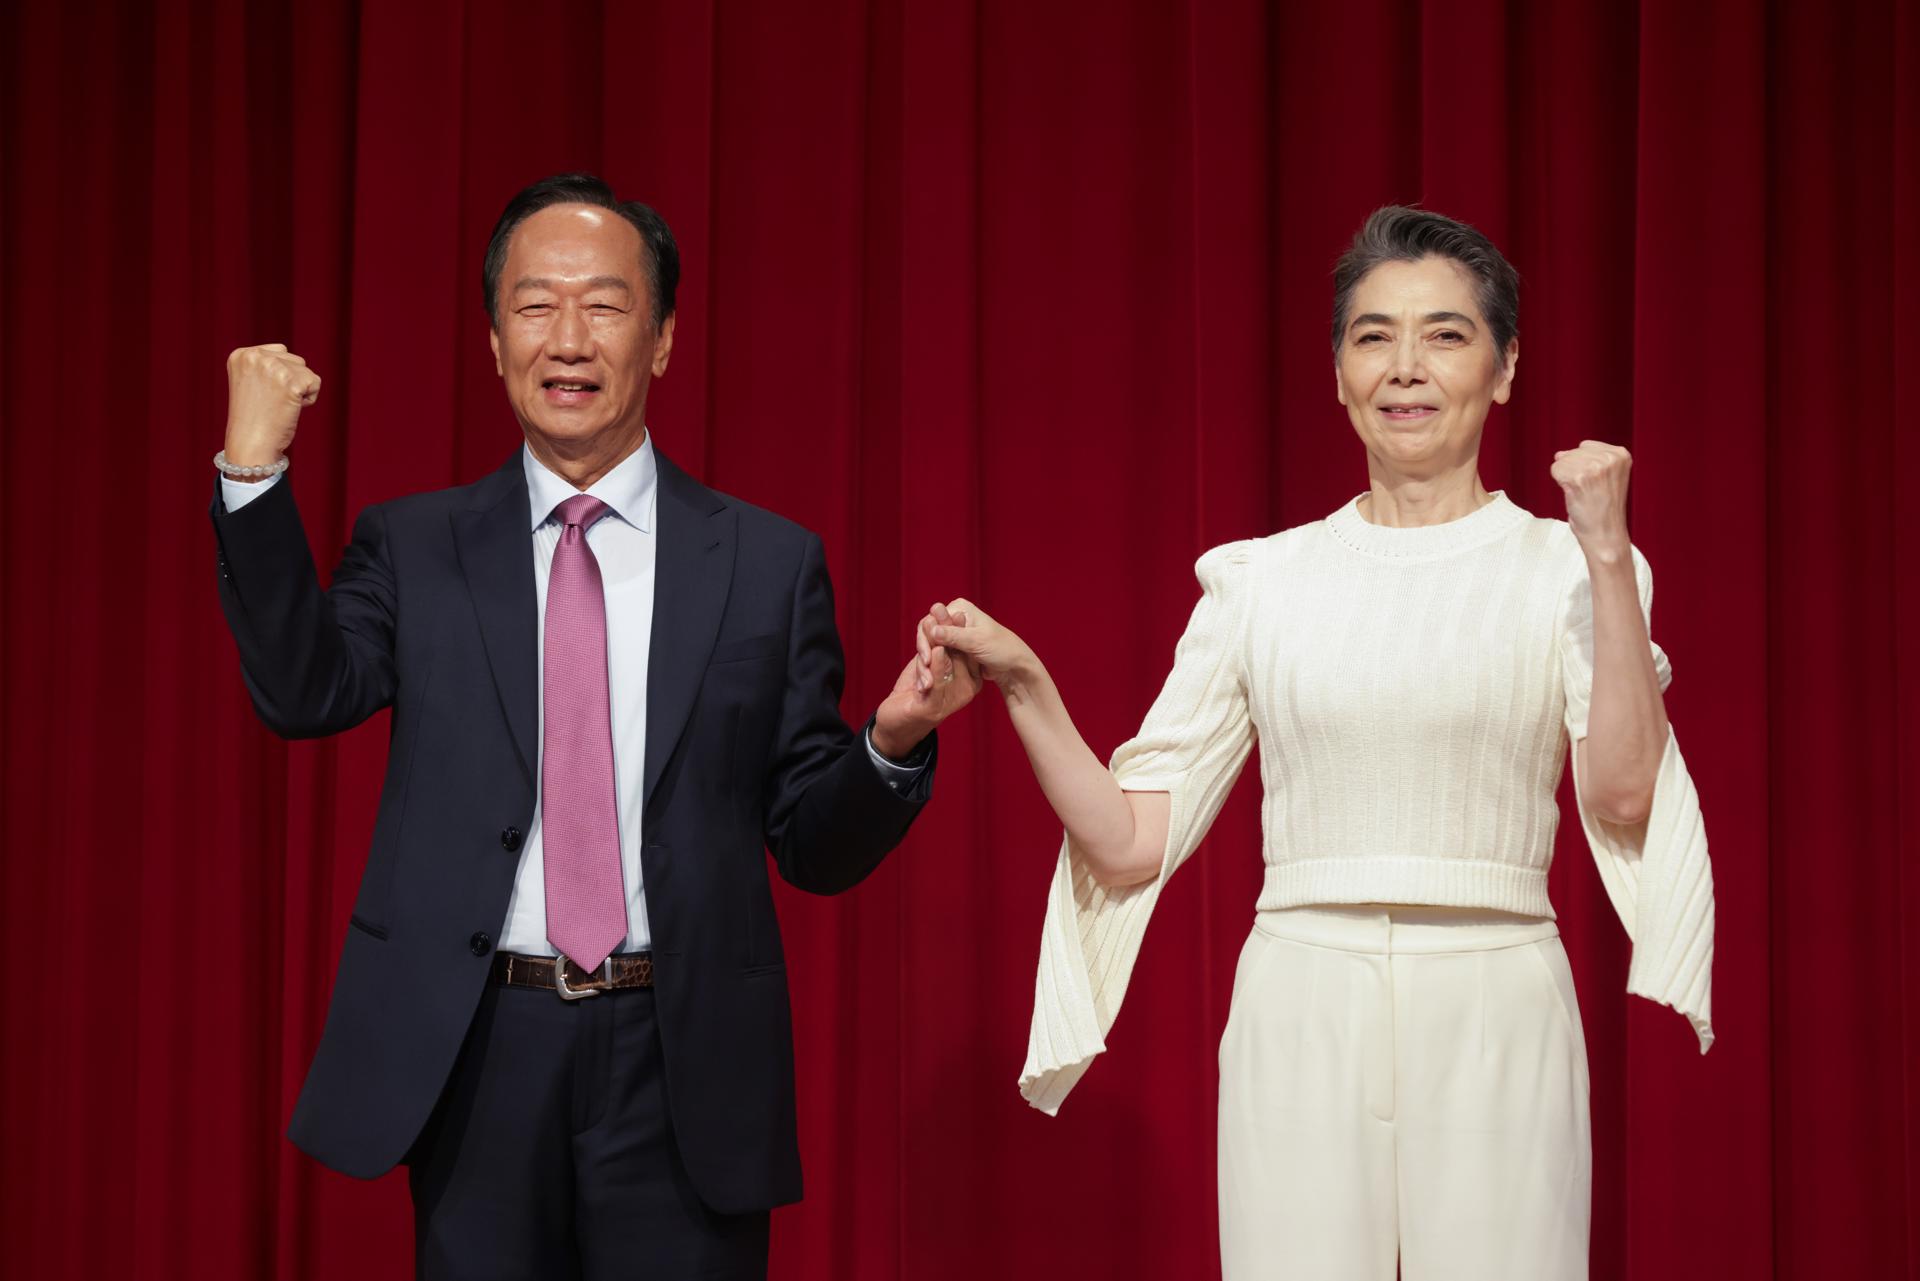 Foxconn founder Terry Gou (L) and running mate Lai Pei-hsia (Tammy) during a press conference in Taipei, Taiwan, 14 September 2023. EFE/EPA/RITCHIE B. TONGO
